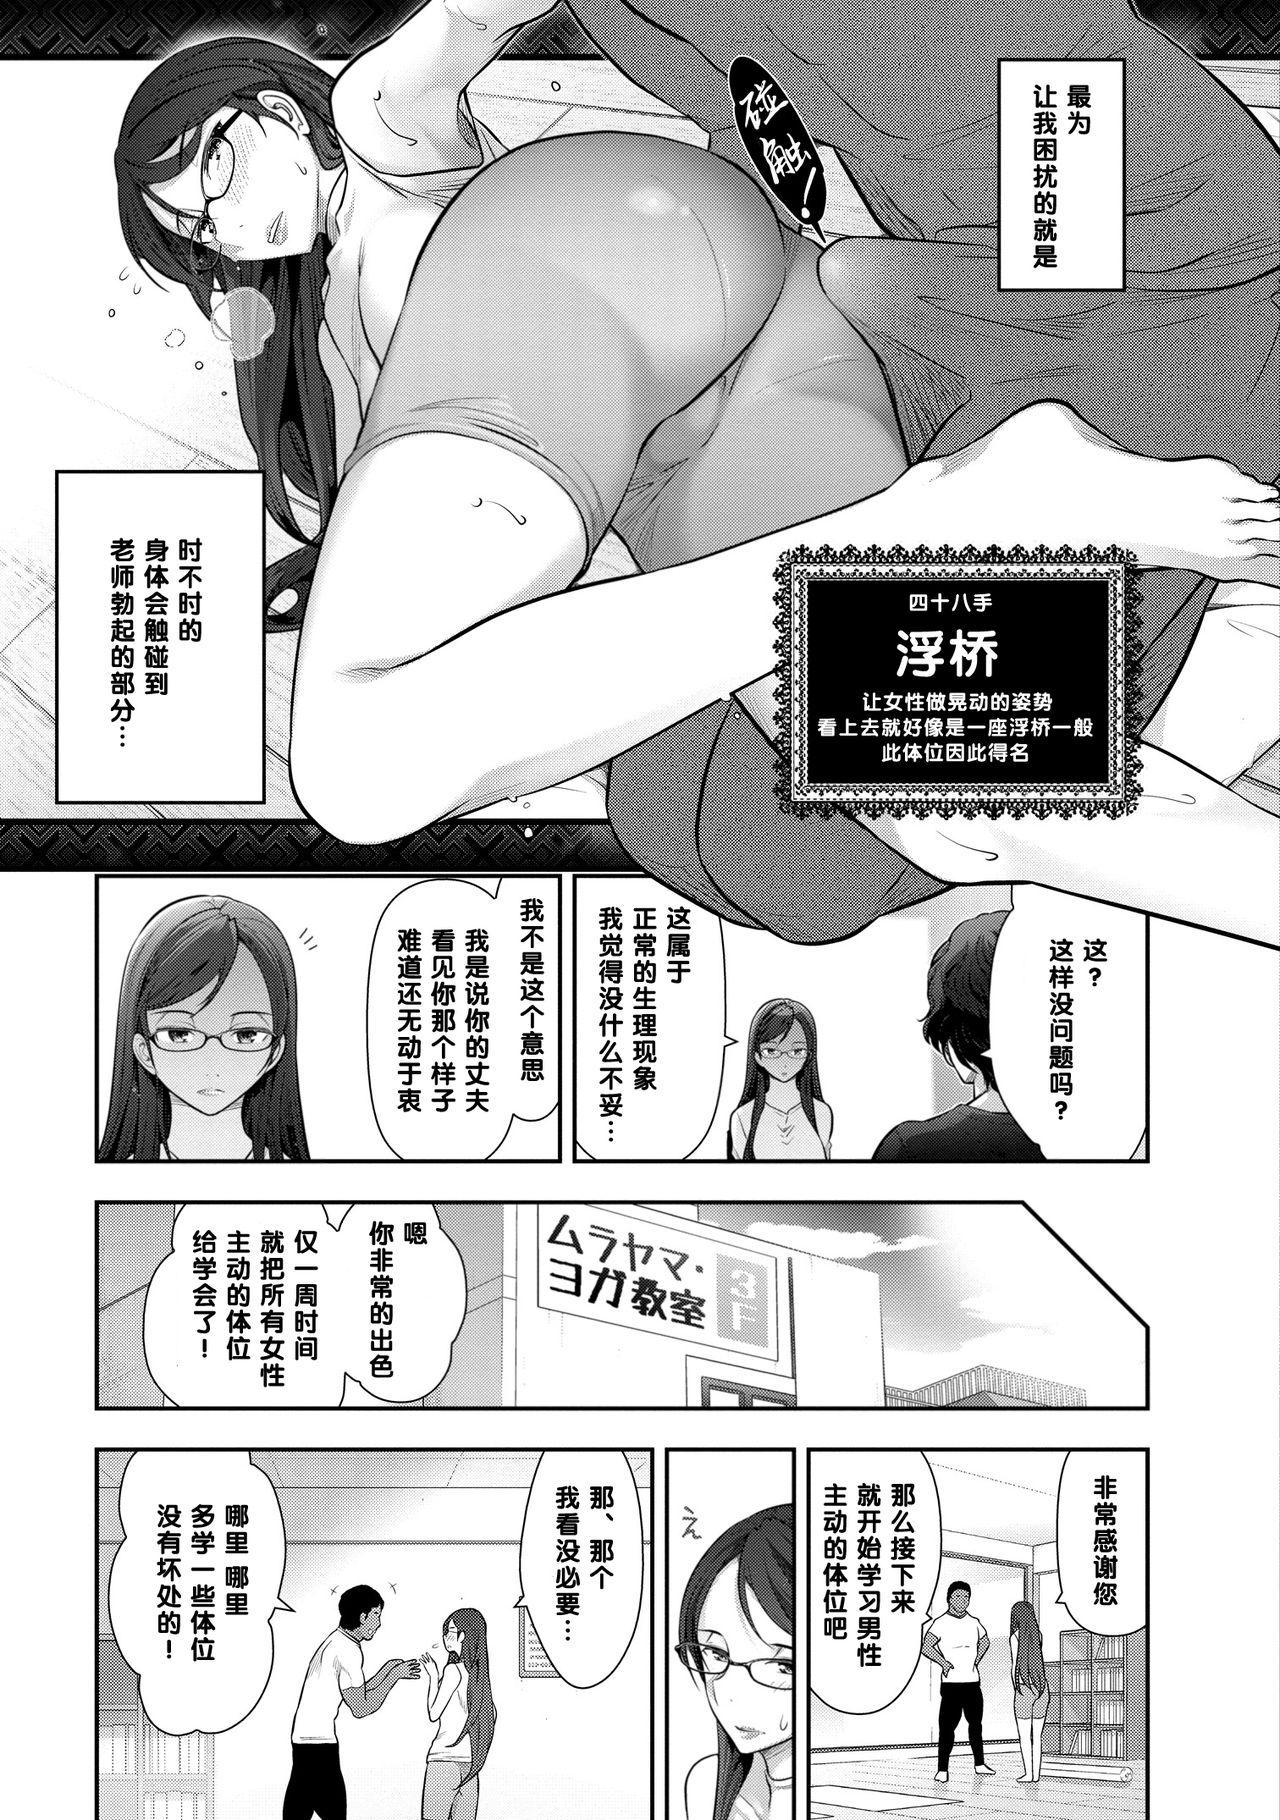 And 布川楓さん（30歳）の場合②（Chinese） Inked - Page 11